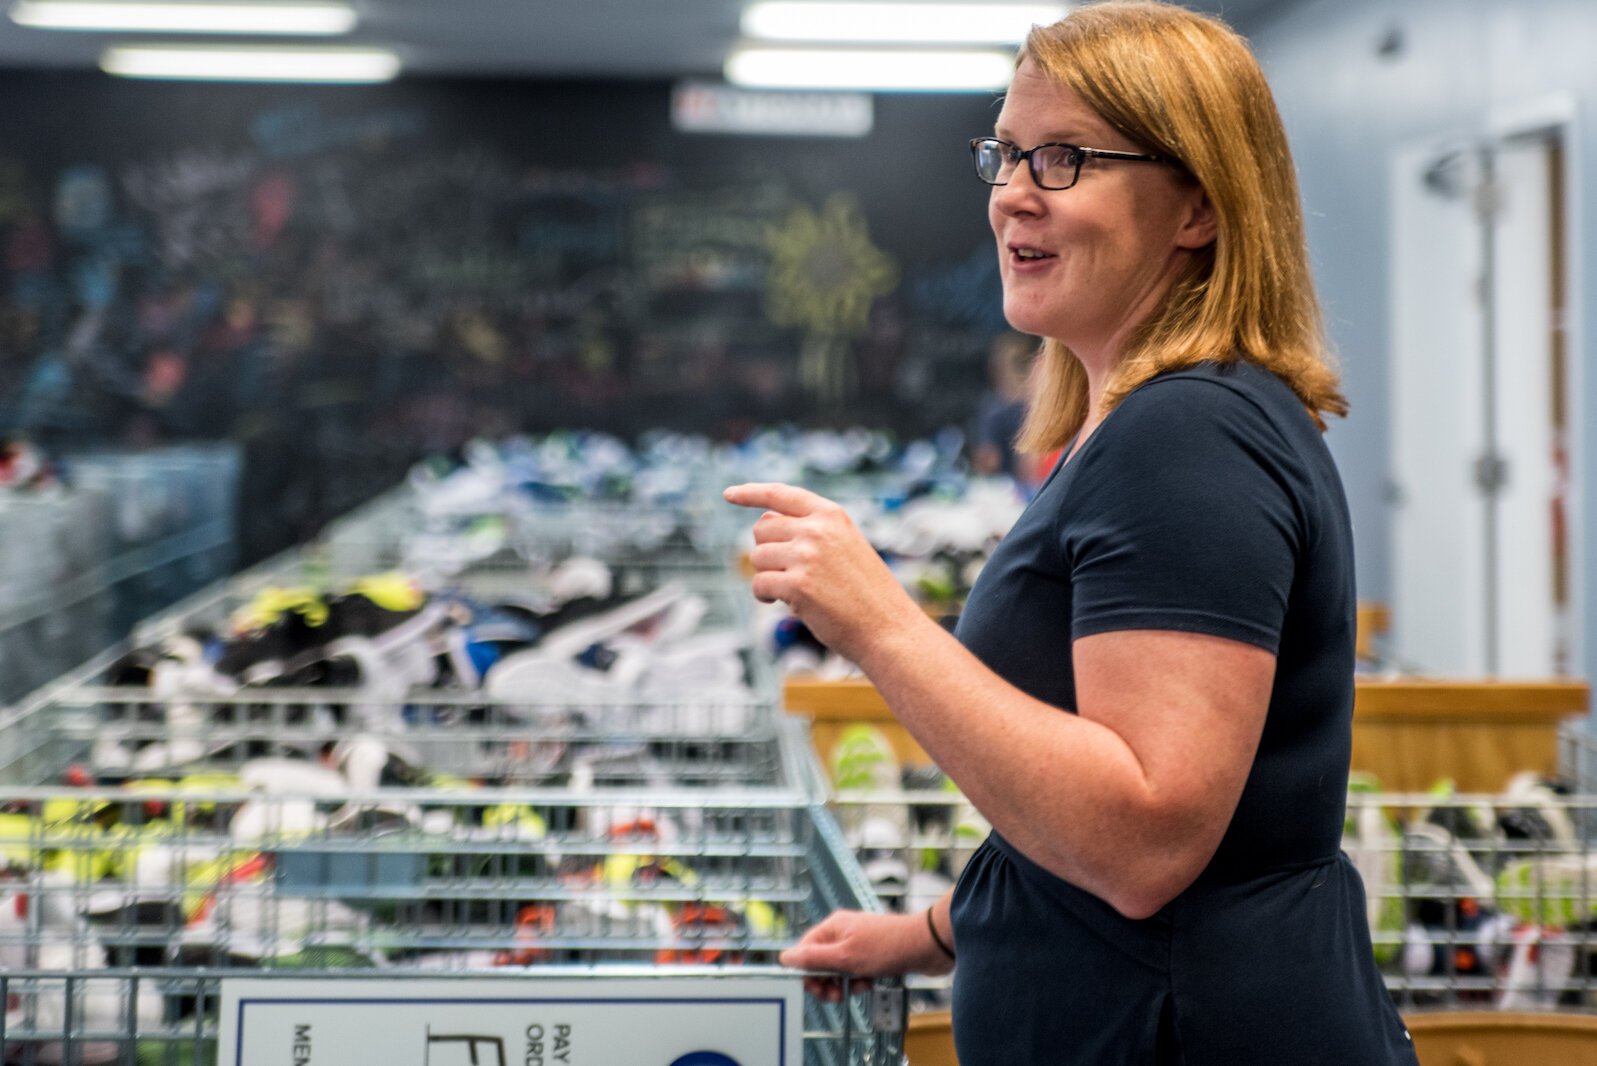 Through Wednesday, June 22, 2022, Maggie Hesketh, executive director of First Day Shoe Fund, says she had purchased 7,399 pair of shoes for kids in need through this week.